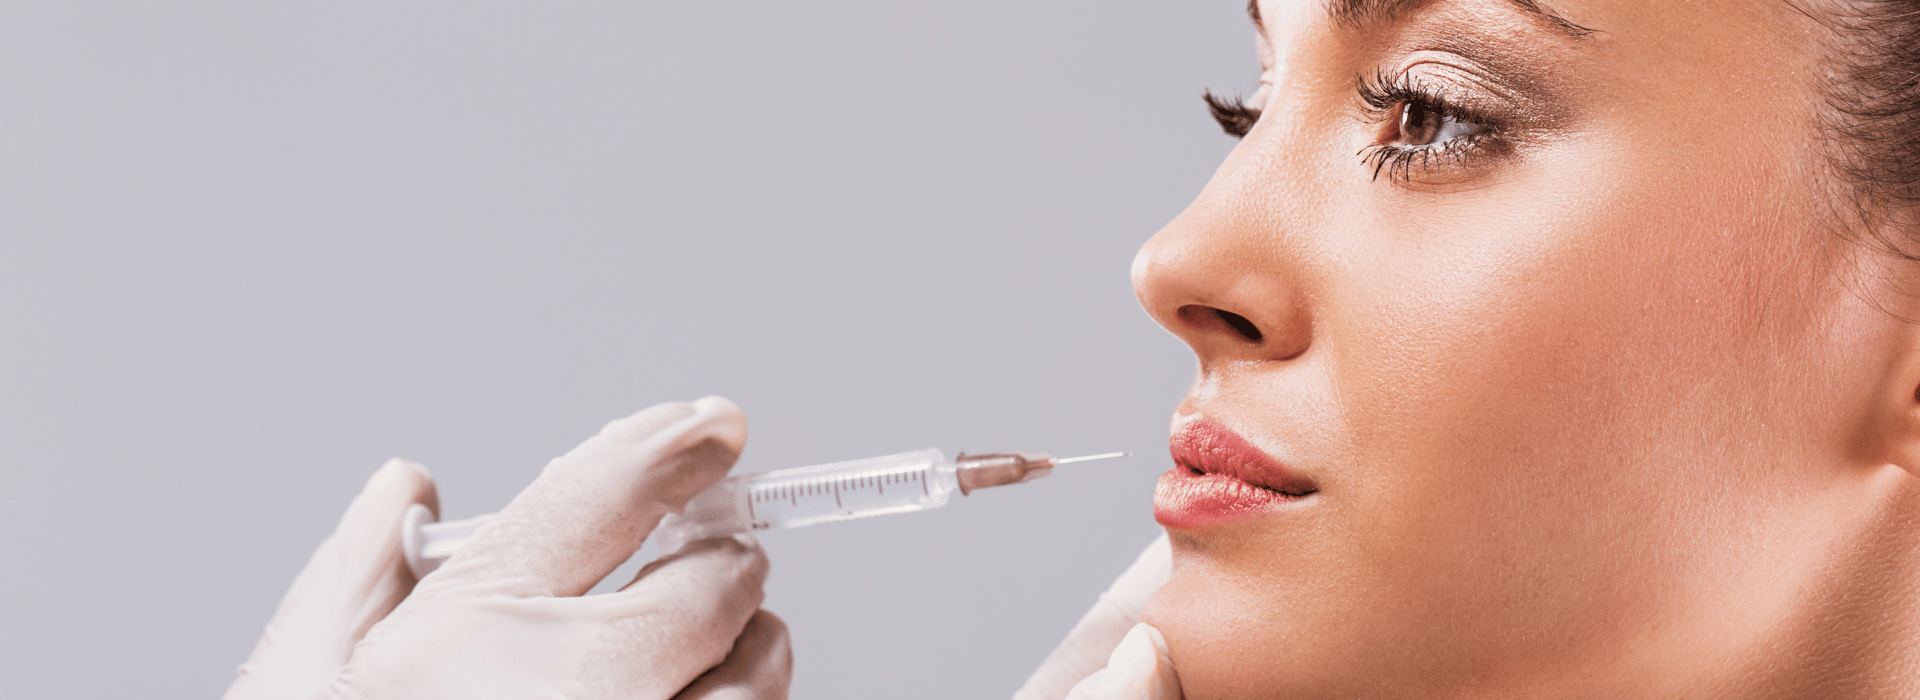 Botox Injections at Wellness 360 Plus in Tampa, FL